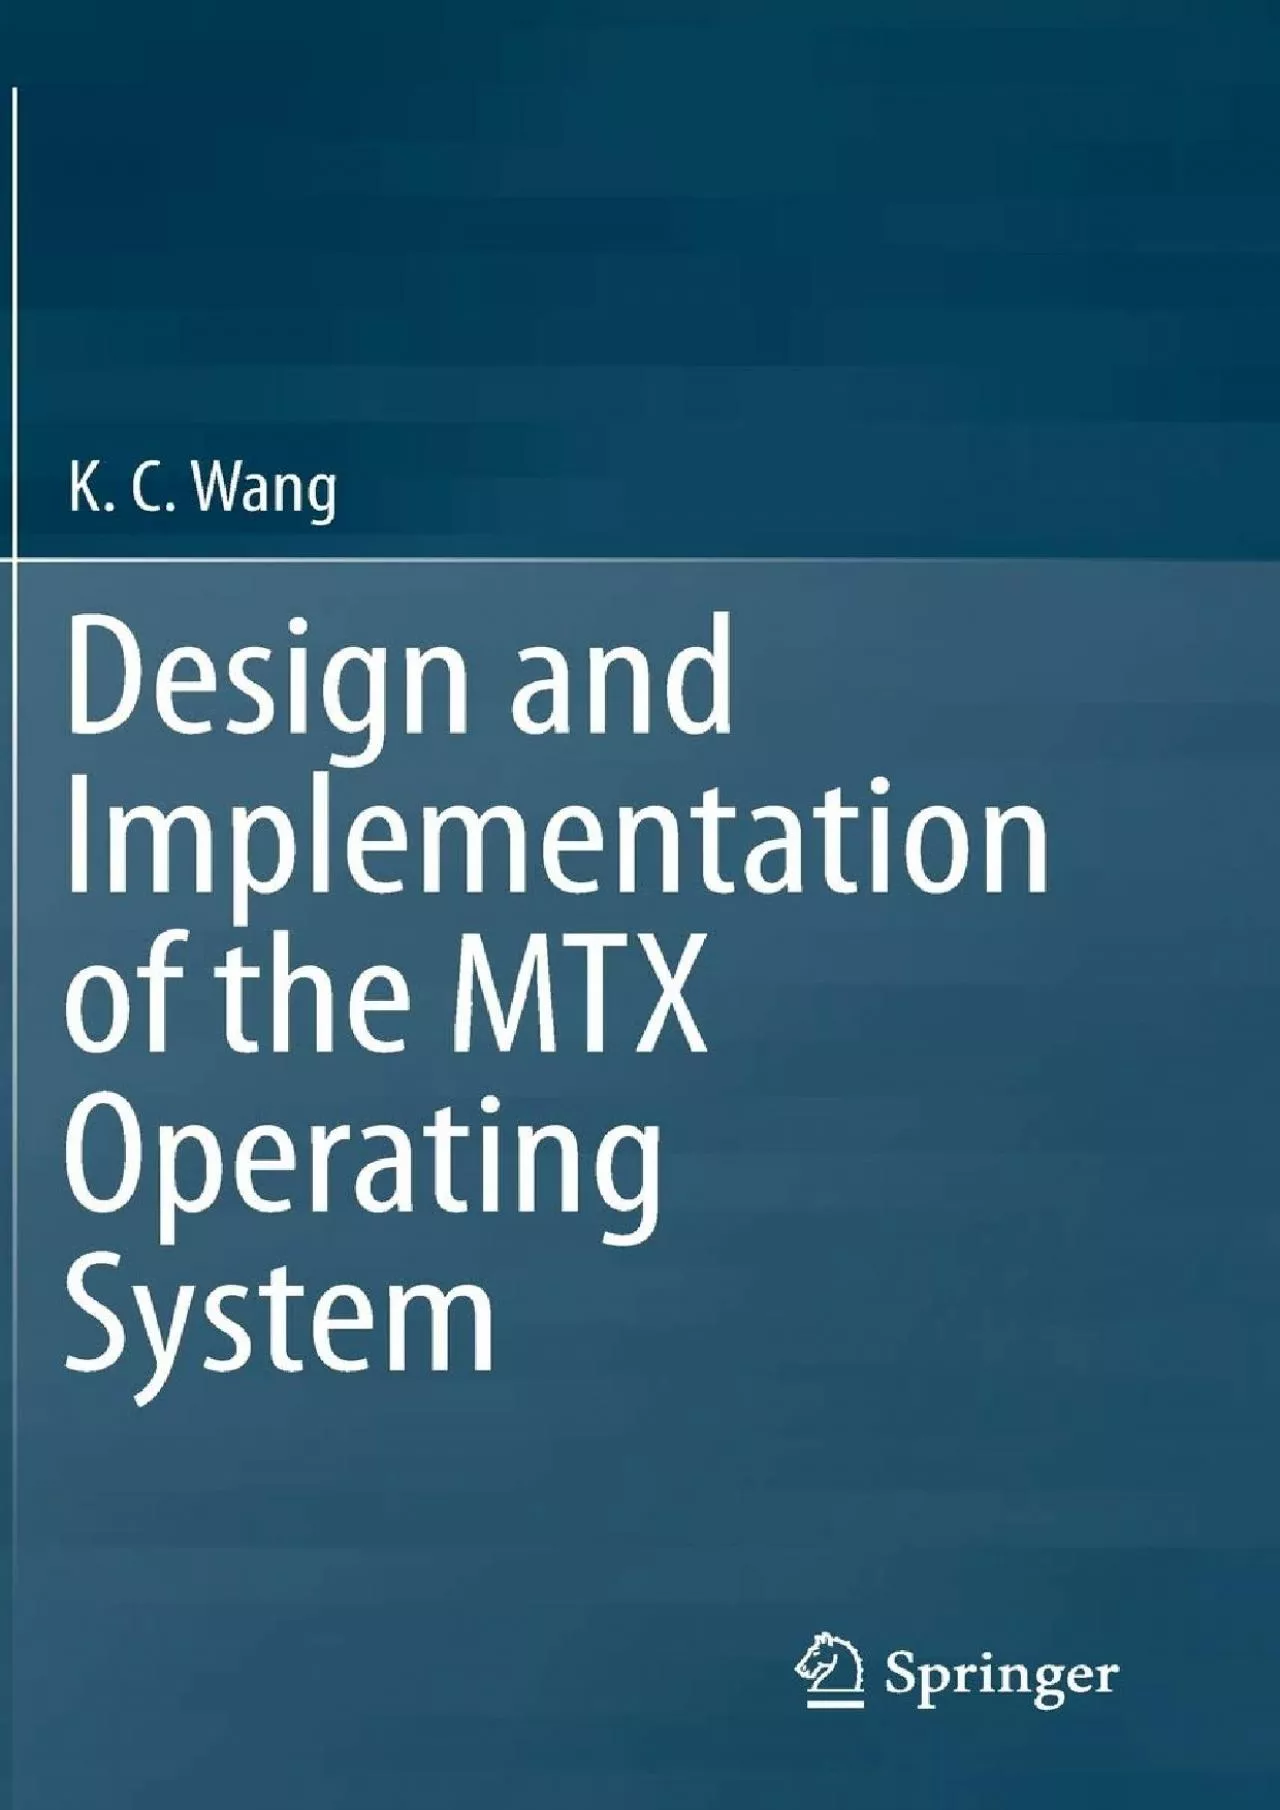 [READING BOOK]-Design and Implementation of the MTX Operating System